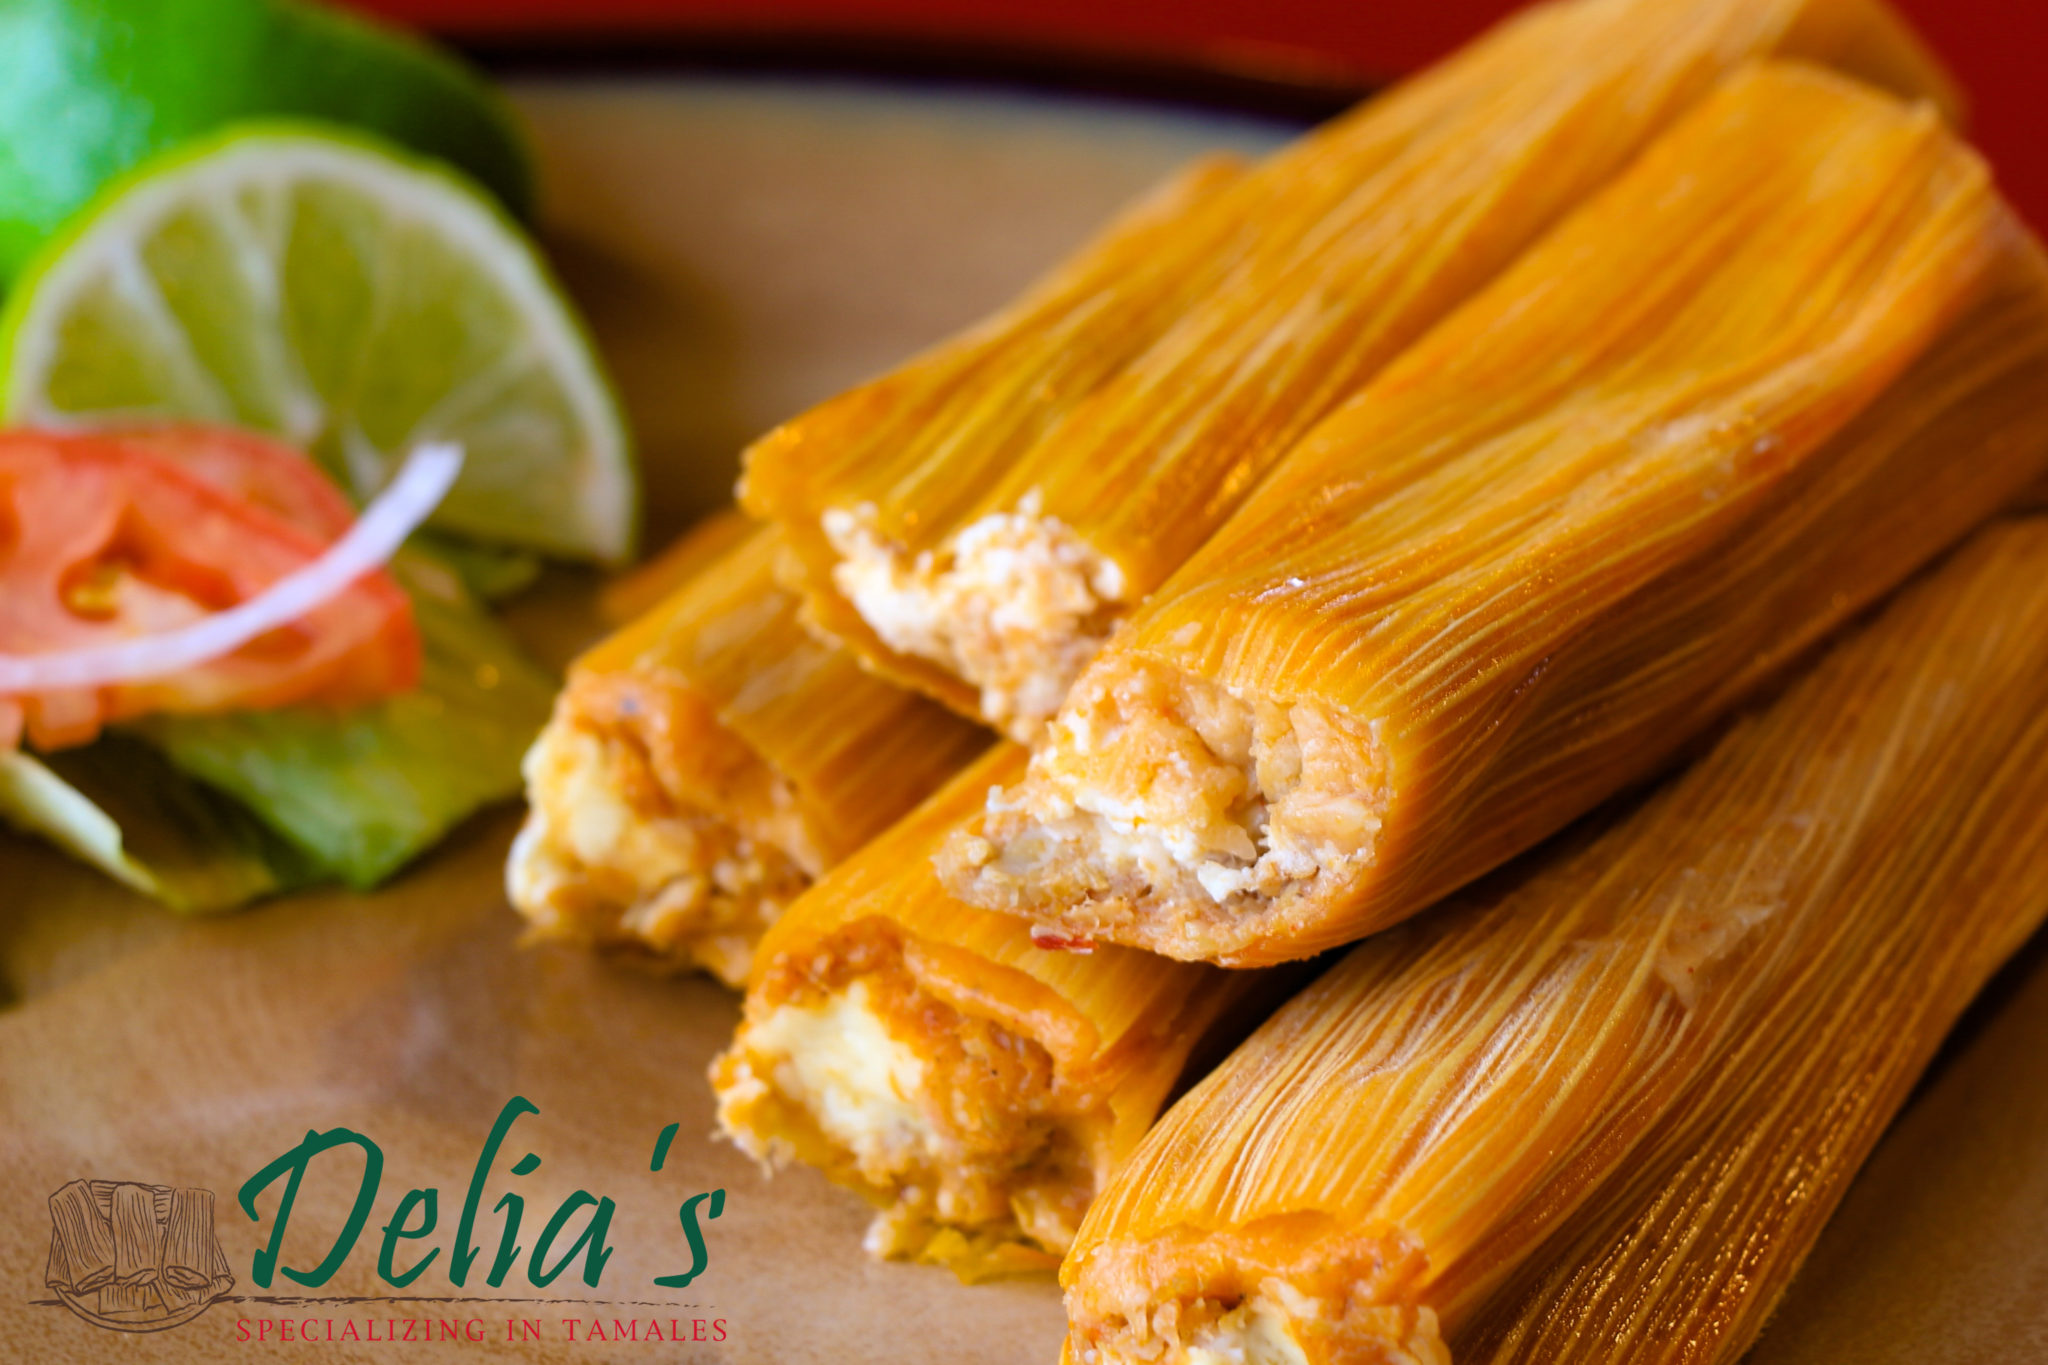 Delia’s Tamales Perfect for Every Holiday, Occasion, and ThreeDay